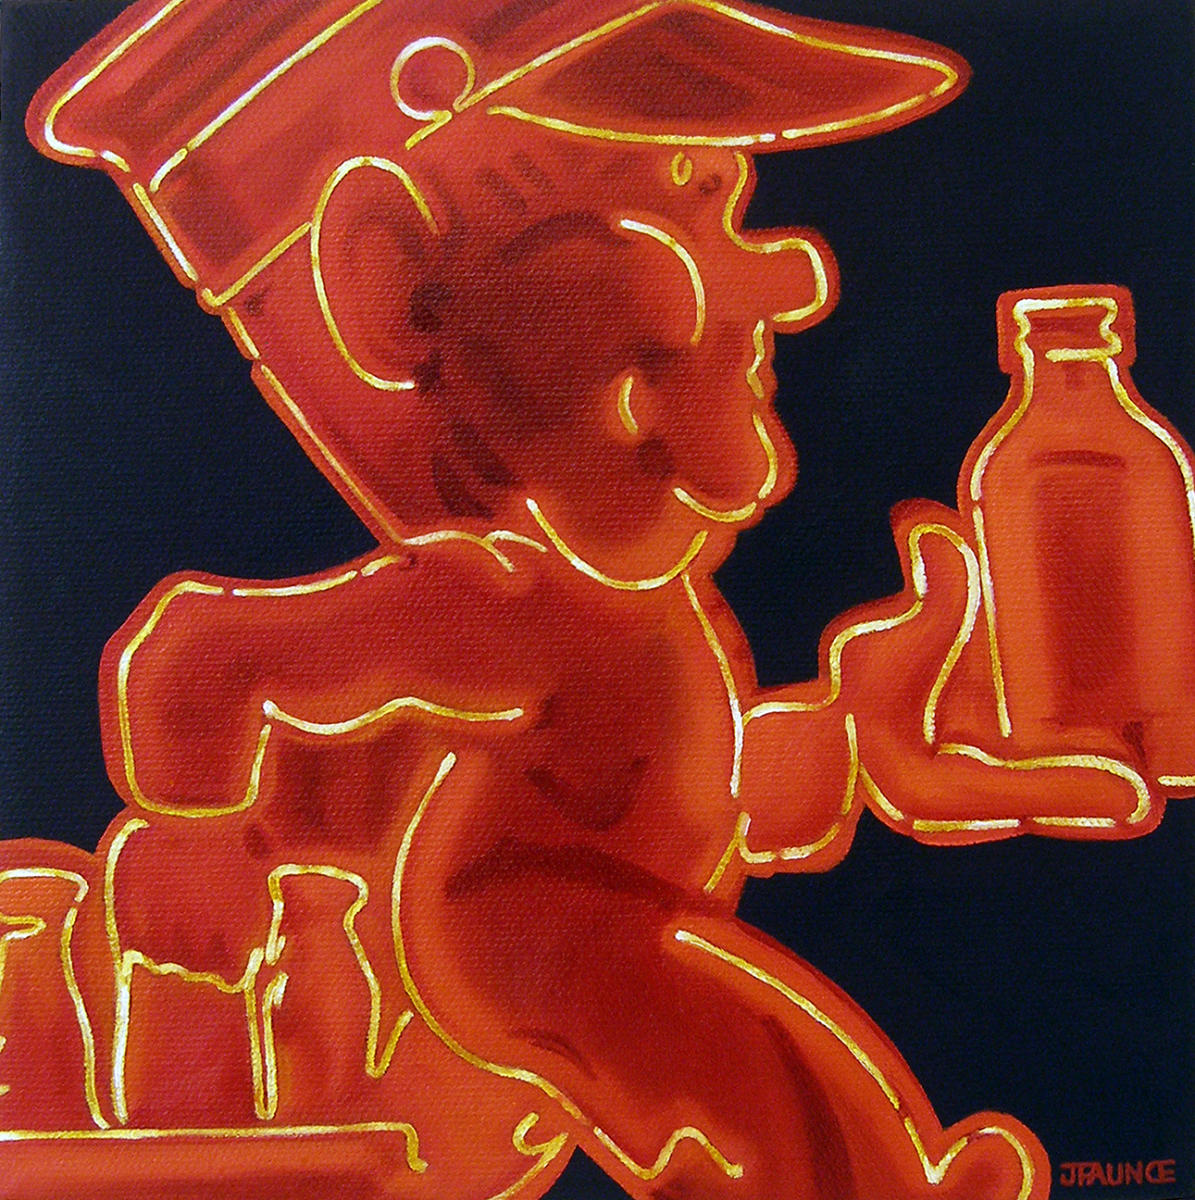 LITTLE RED VEGAS I - 8"x8" - OIL ON CANVAS - PRIVATE COLLECTION